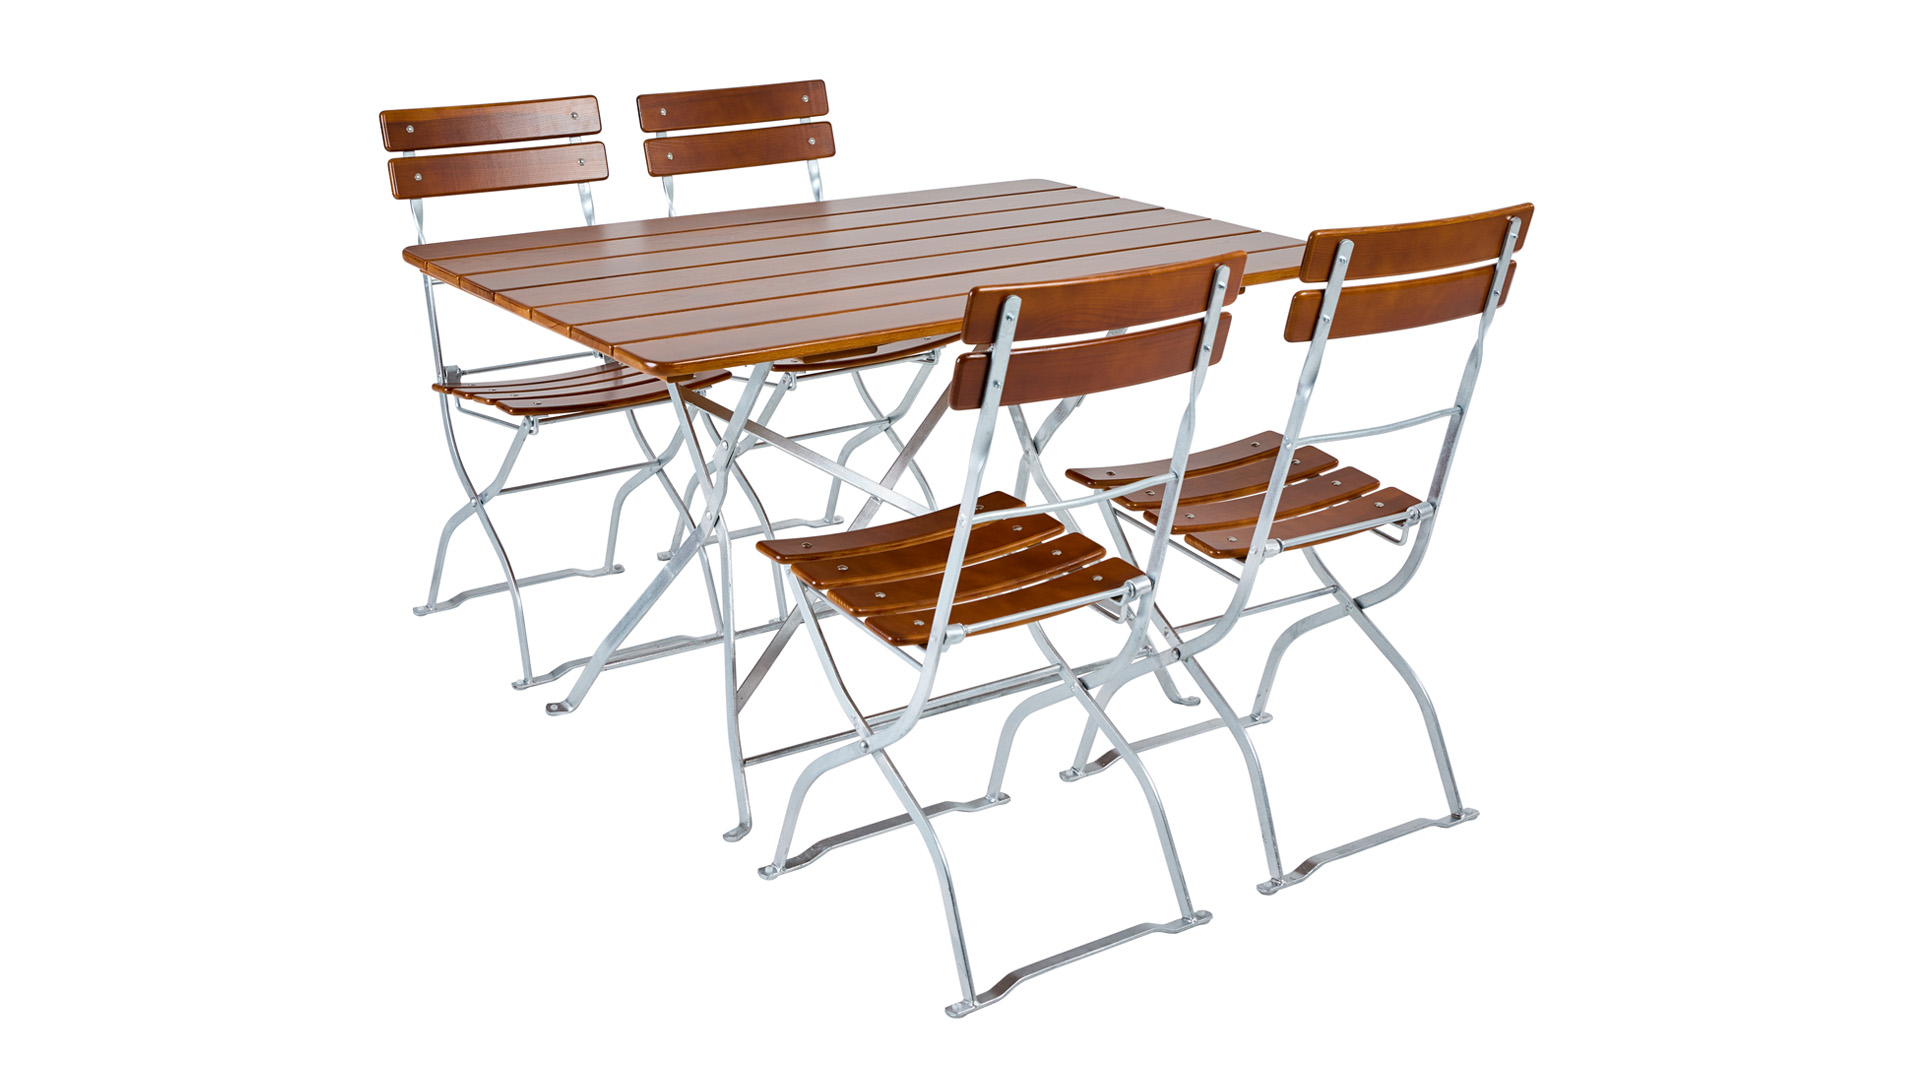 The rectangular beer garden table is represented with four beer garden chairs.